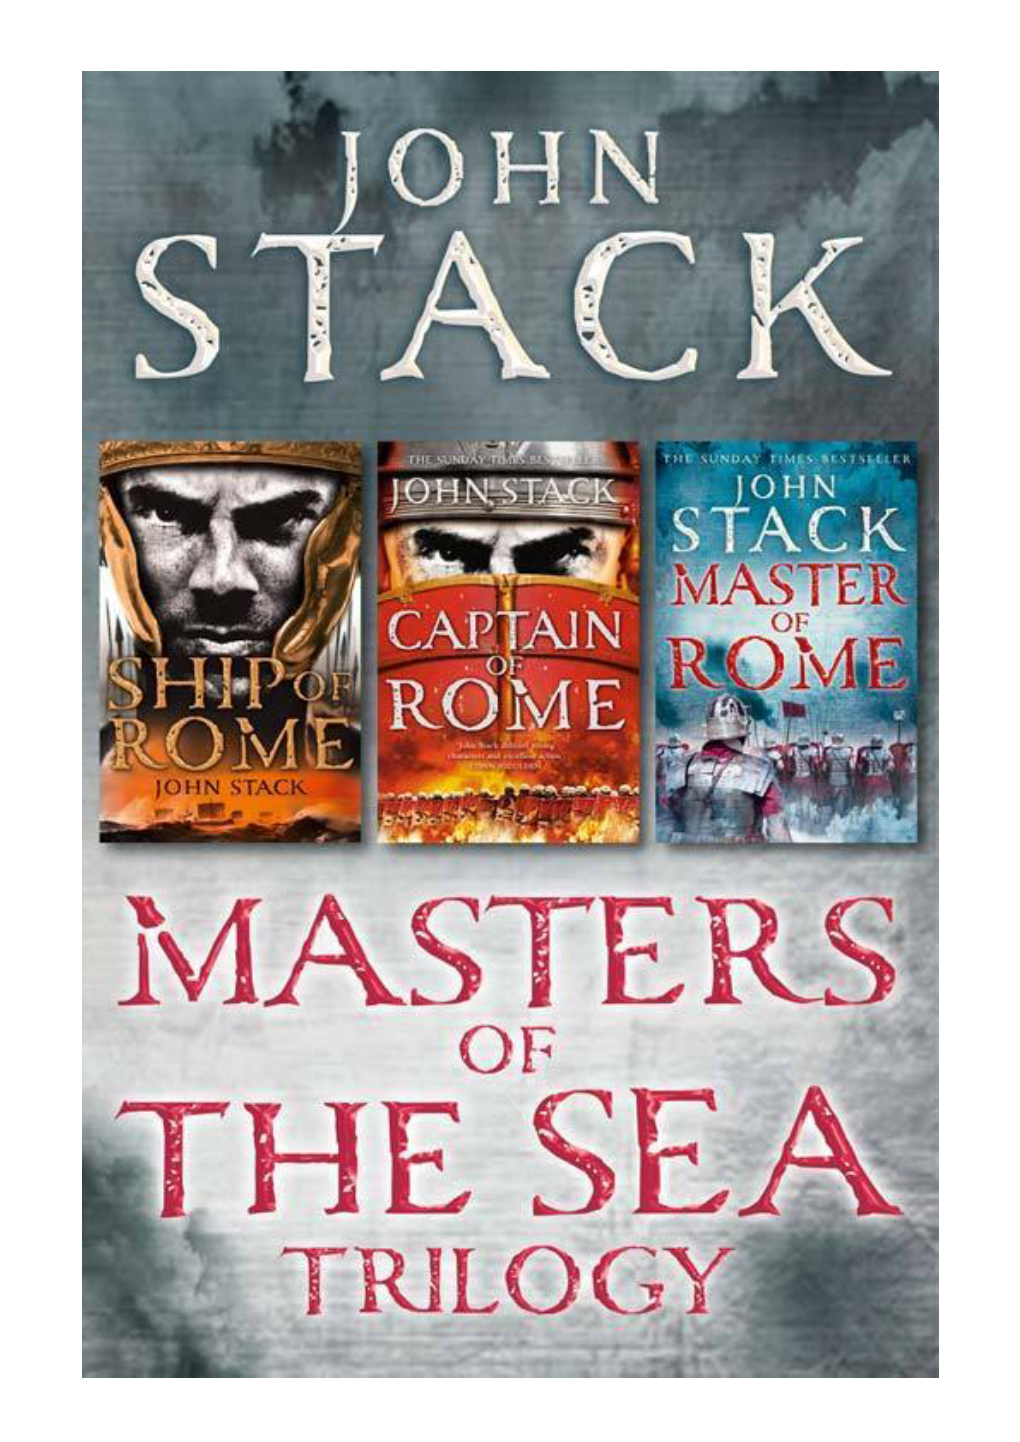 John Stack Masters of the Sea Trilogy: Ship of Rome, Captain of Rome, Master of Rome